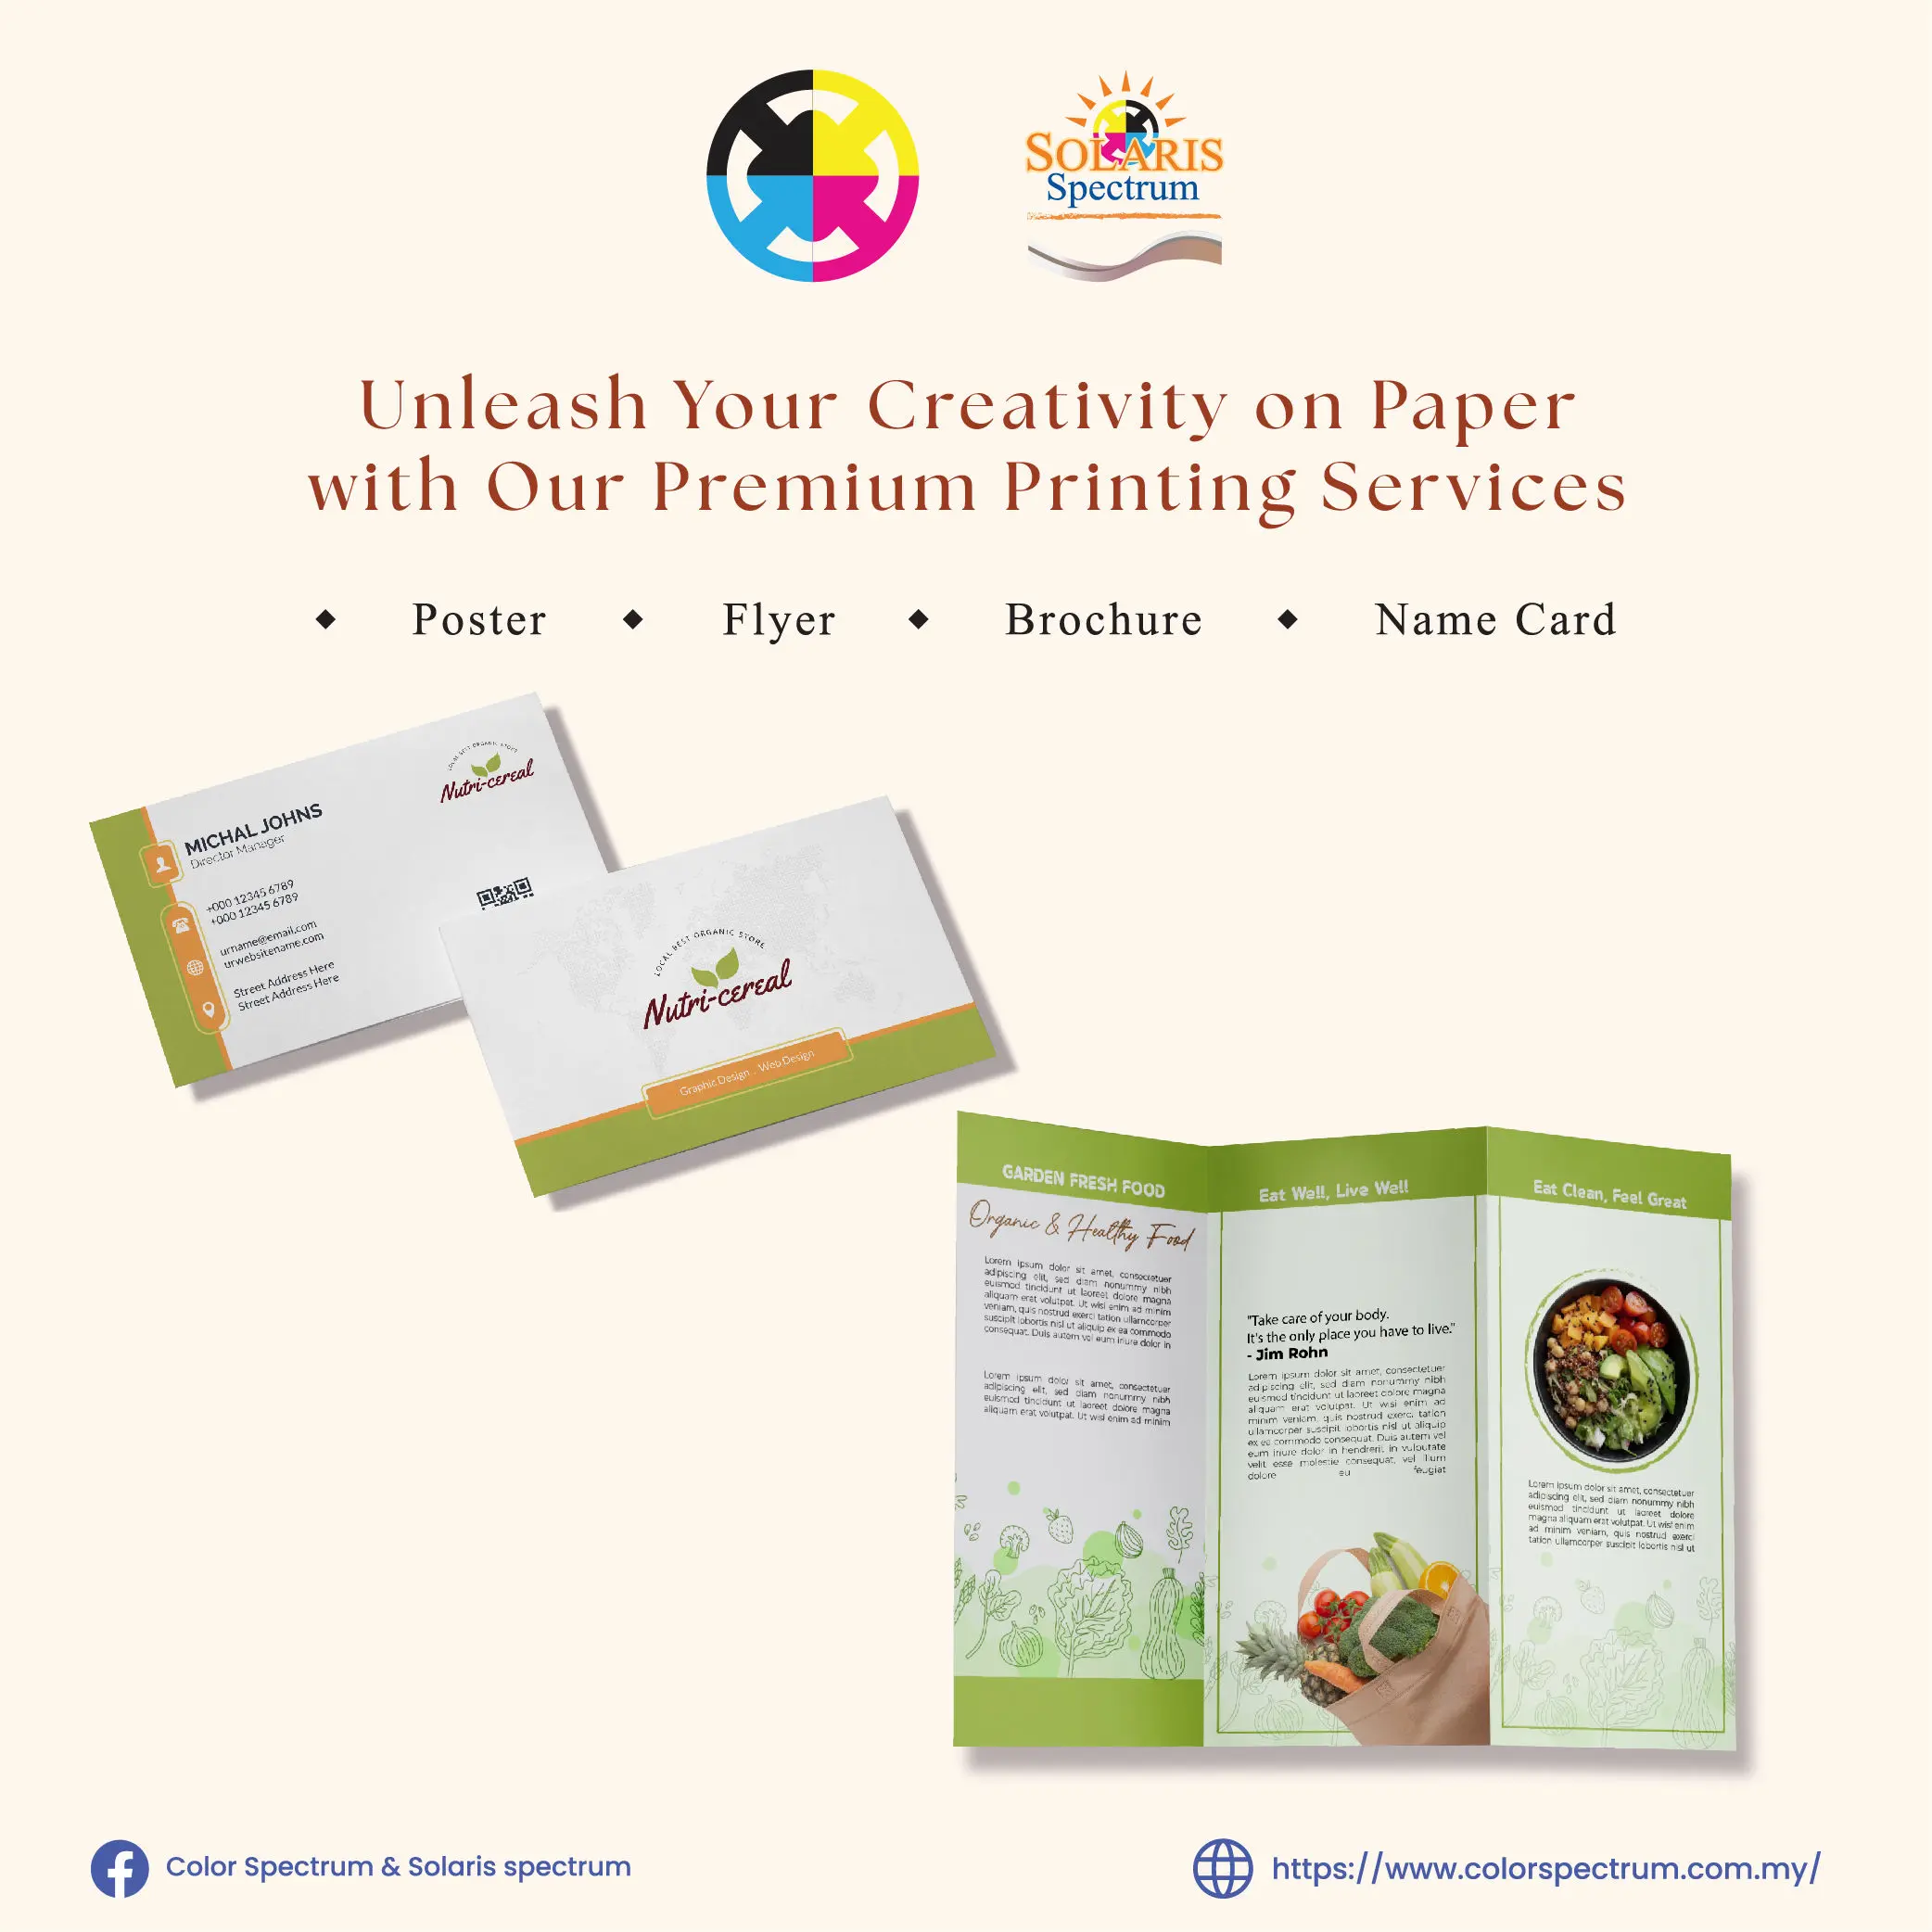 3) Unleash Your Creativity on Paper with Our Premium Printing Services